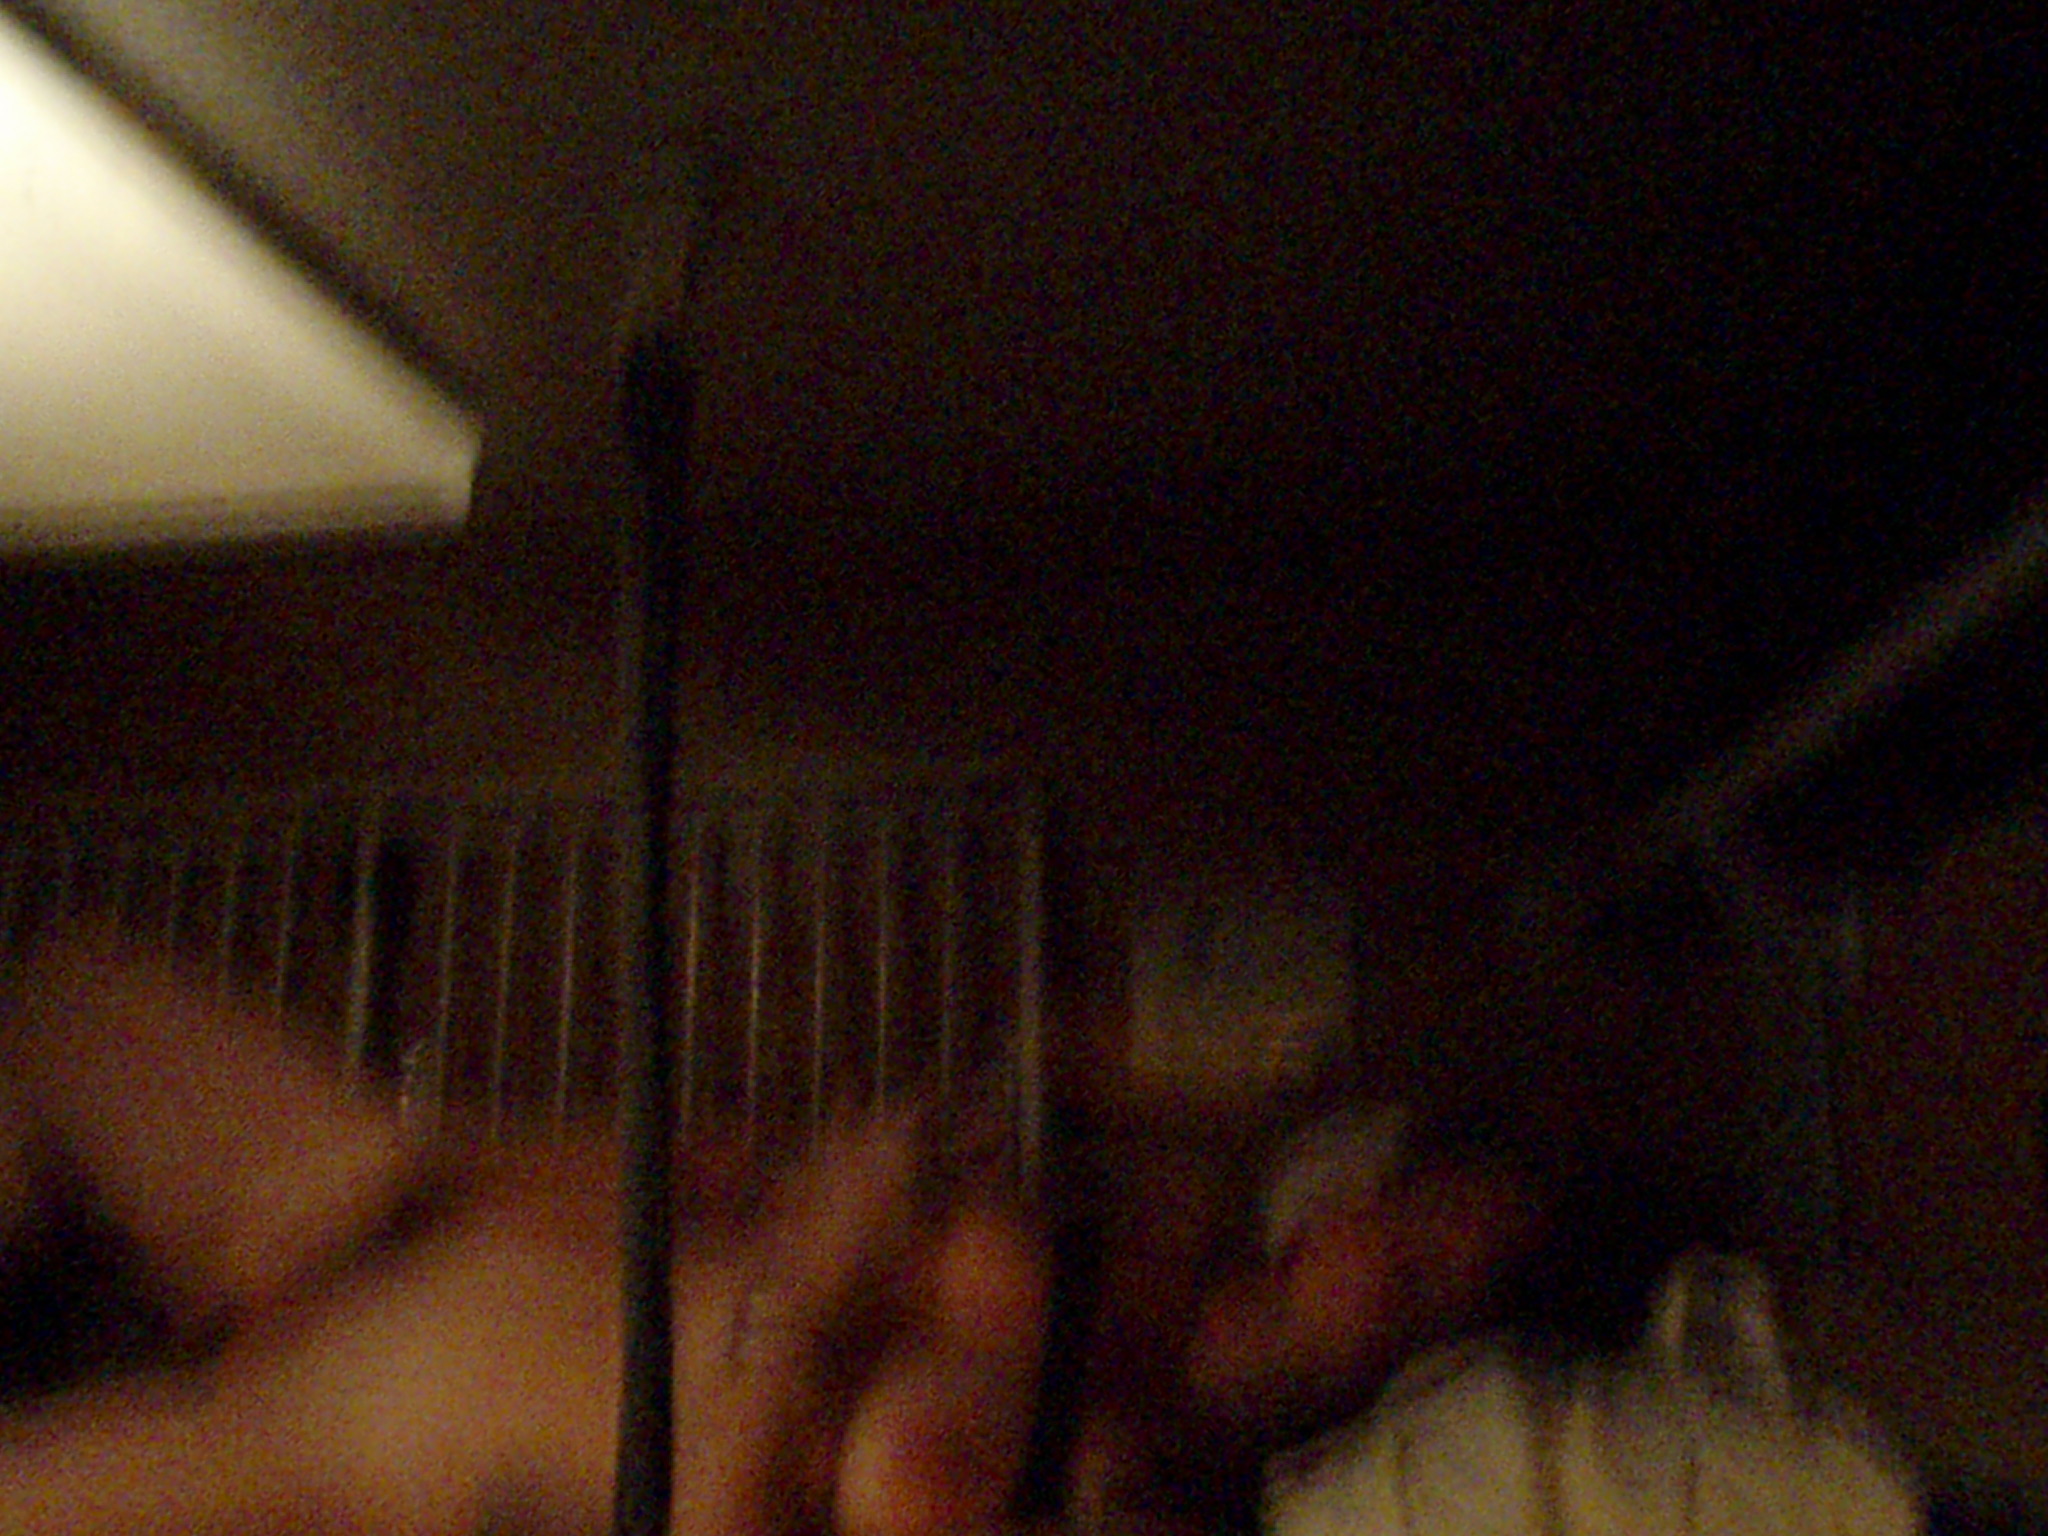 Stripped and fingering my clit in the night train